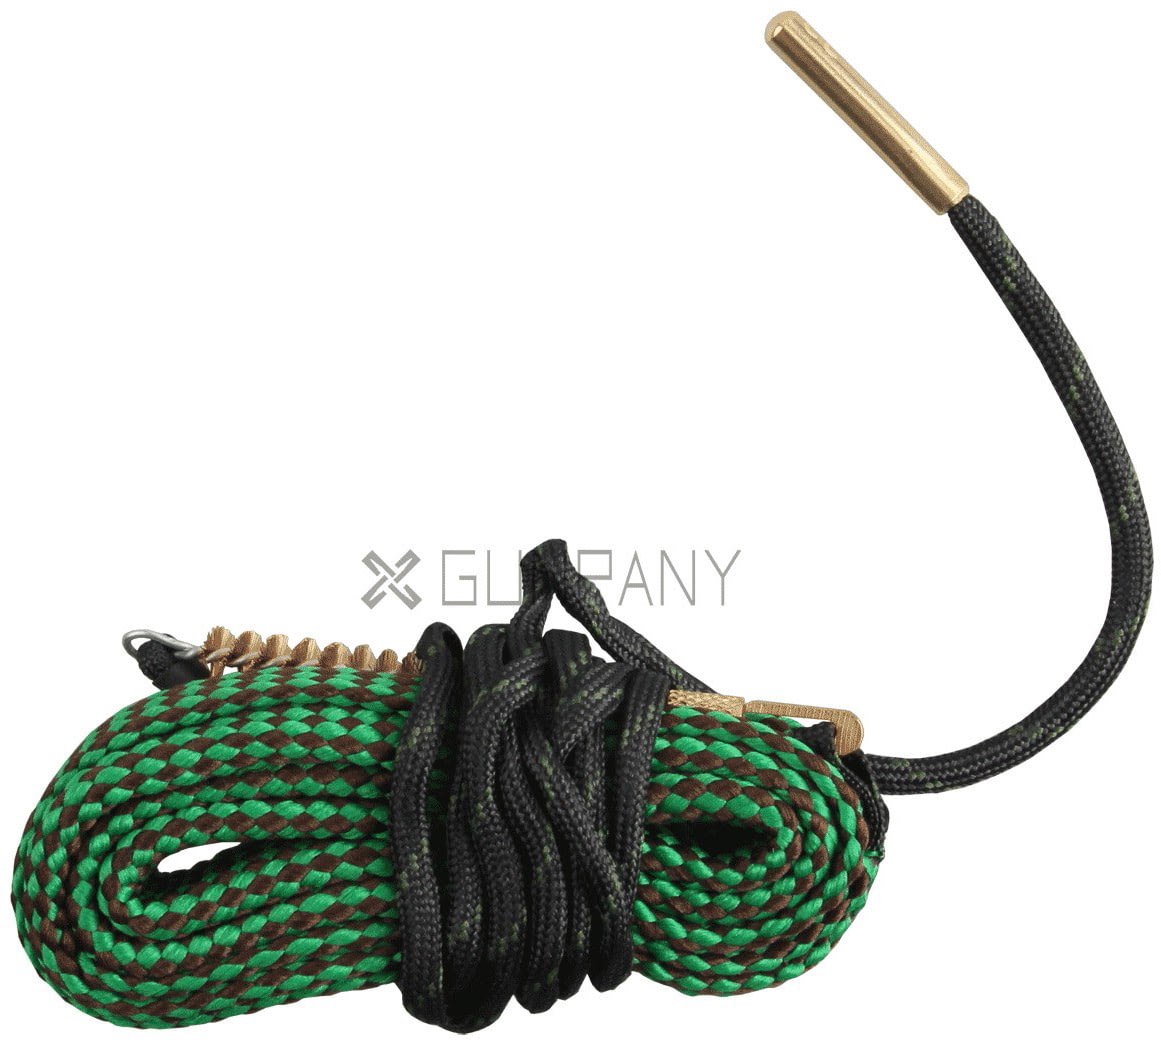 What is a Bore Snake? How To Use a Bore Snake